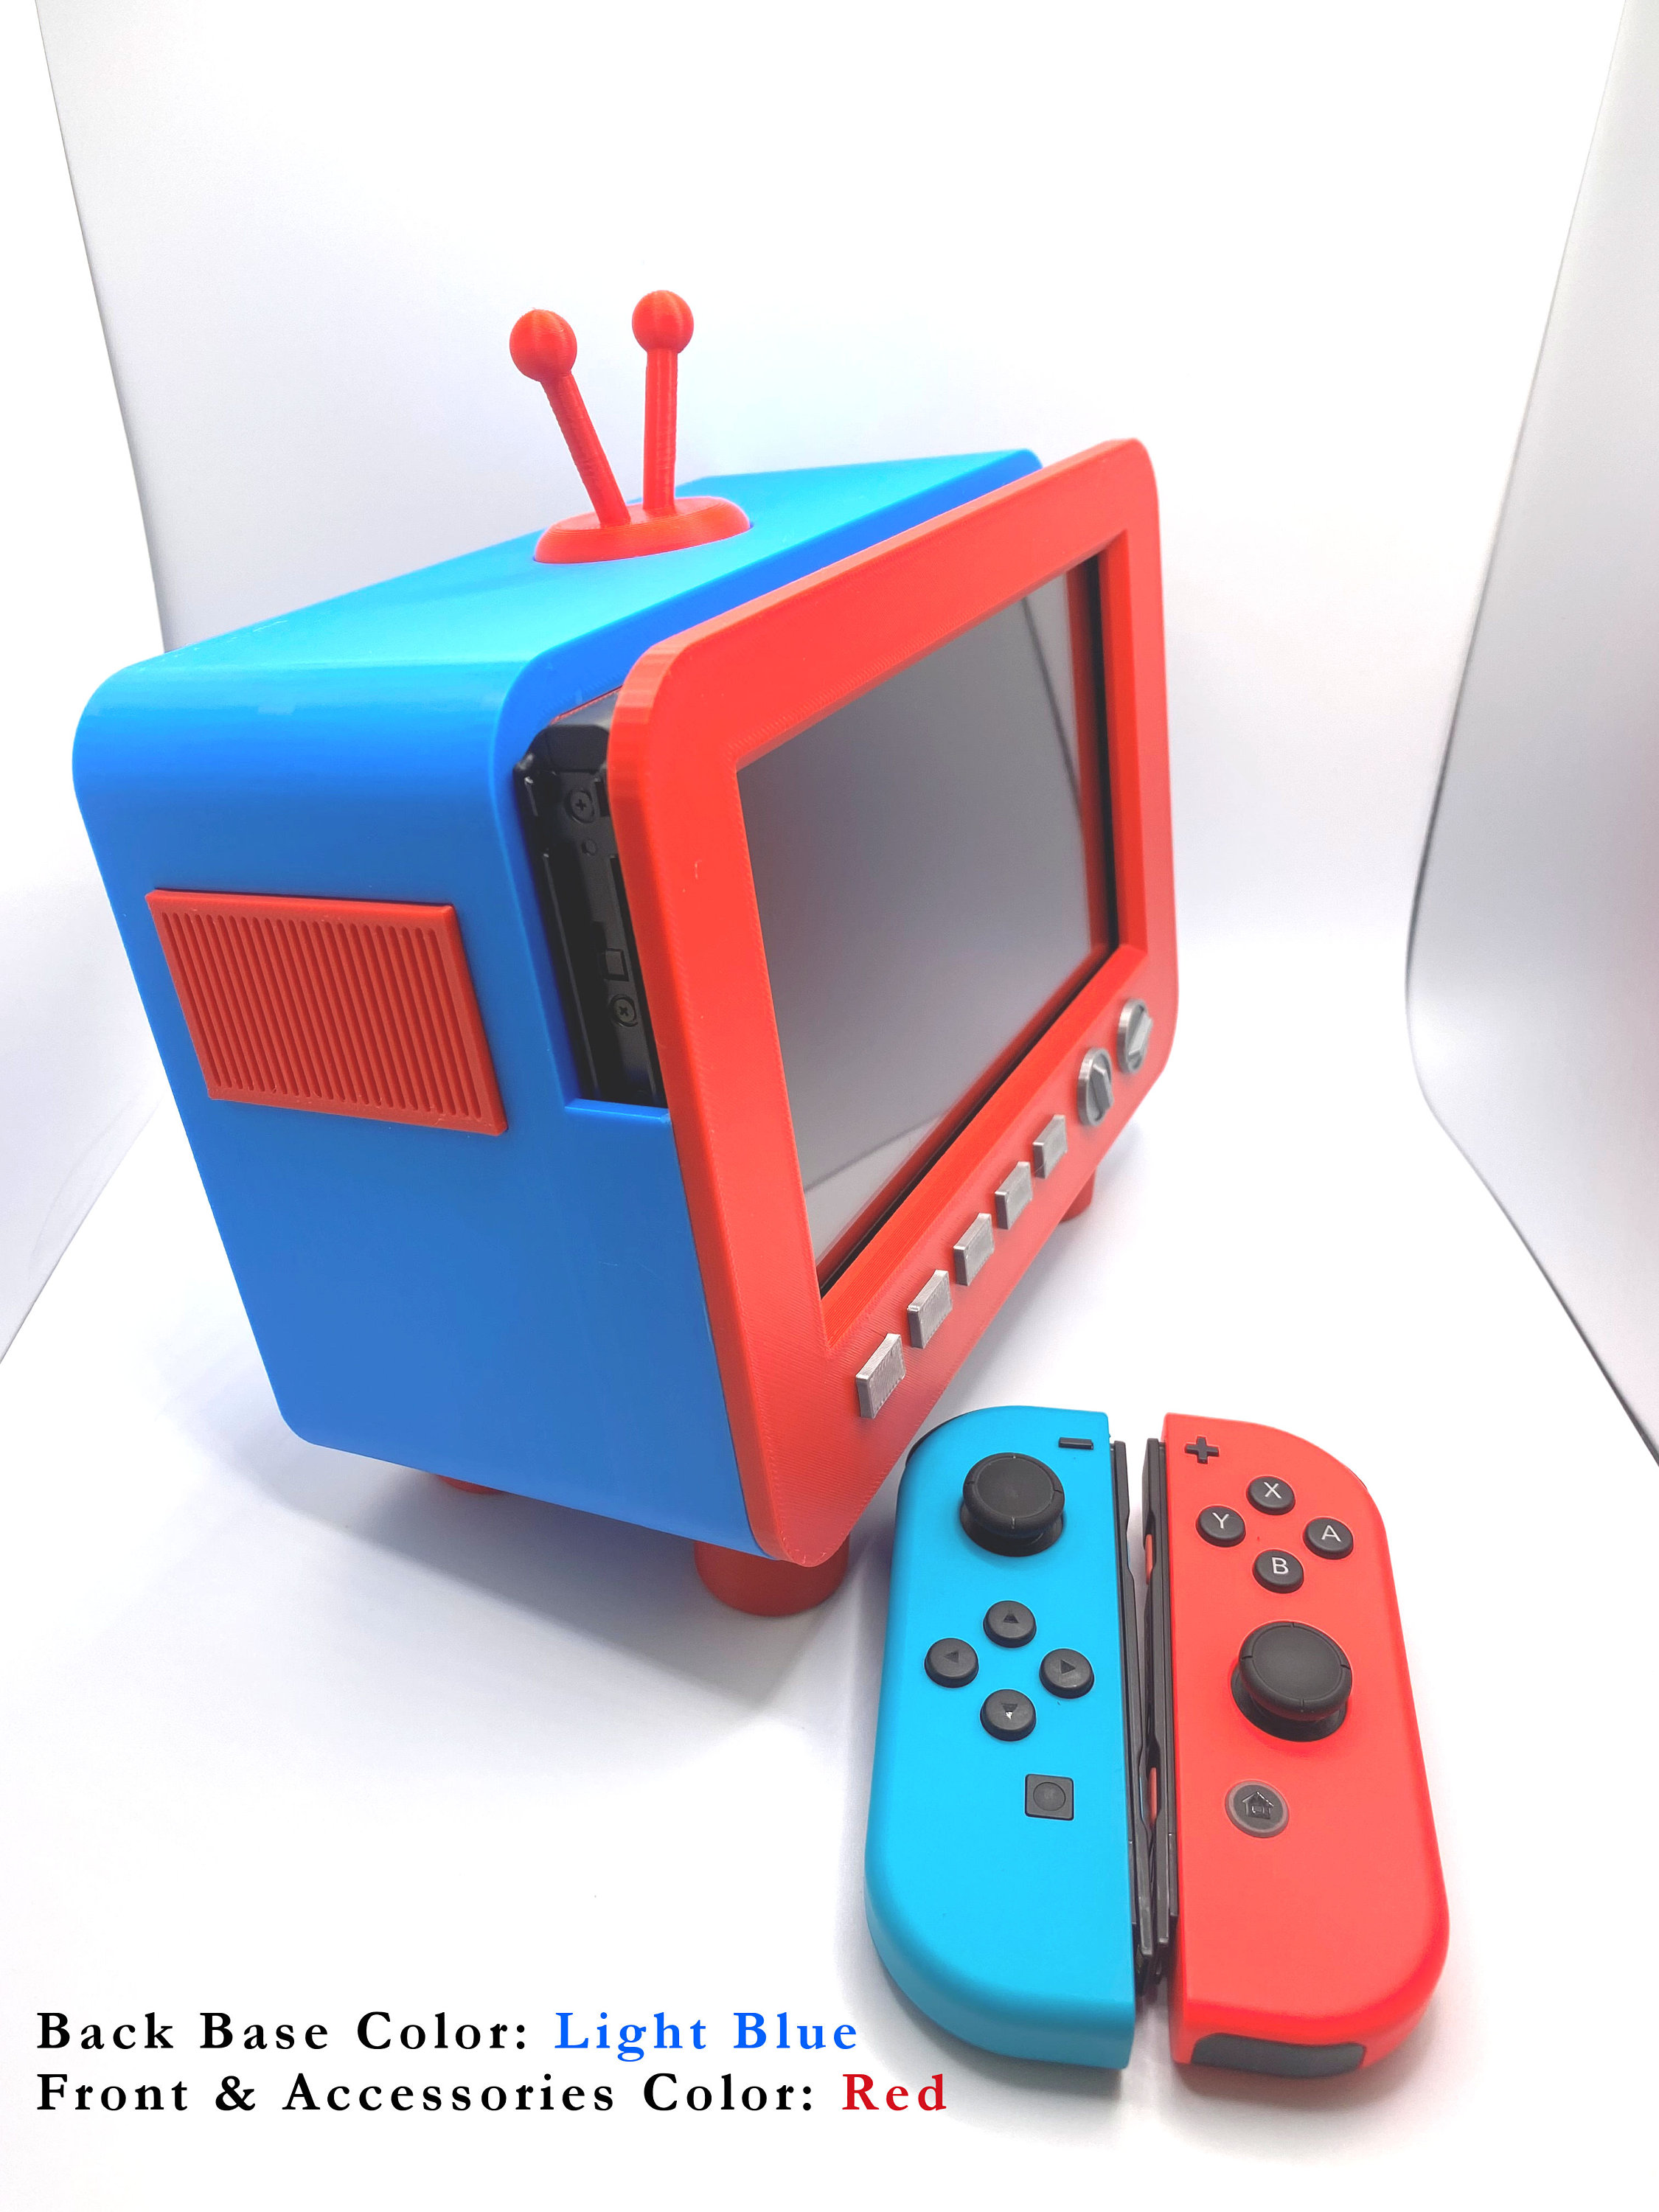 Mini TV Display for Original Nintendo Switch, Play Your Switch Games With  This Retro Classic Mini TV Display 